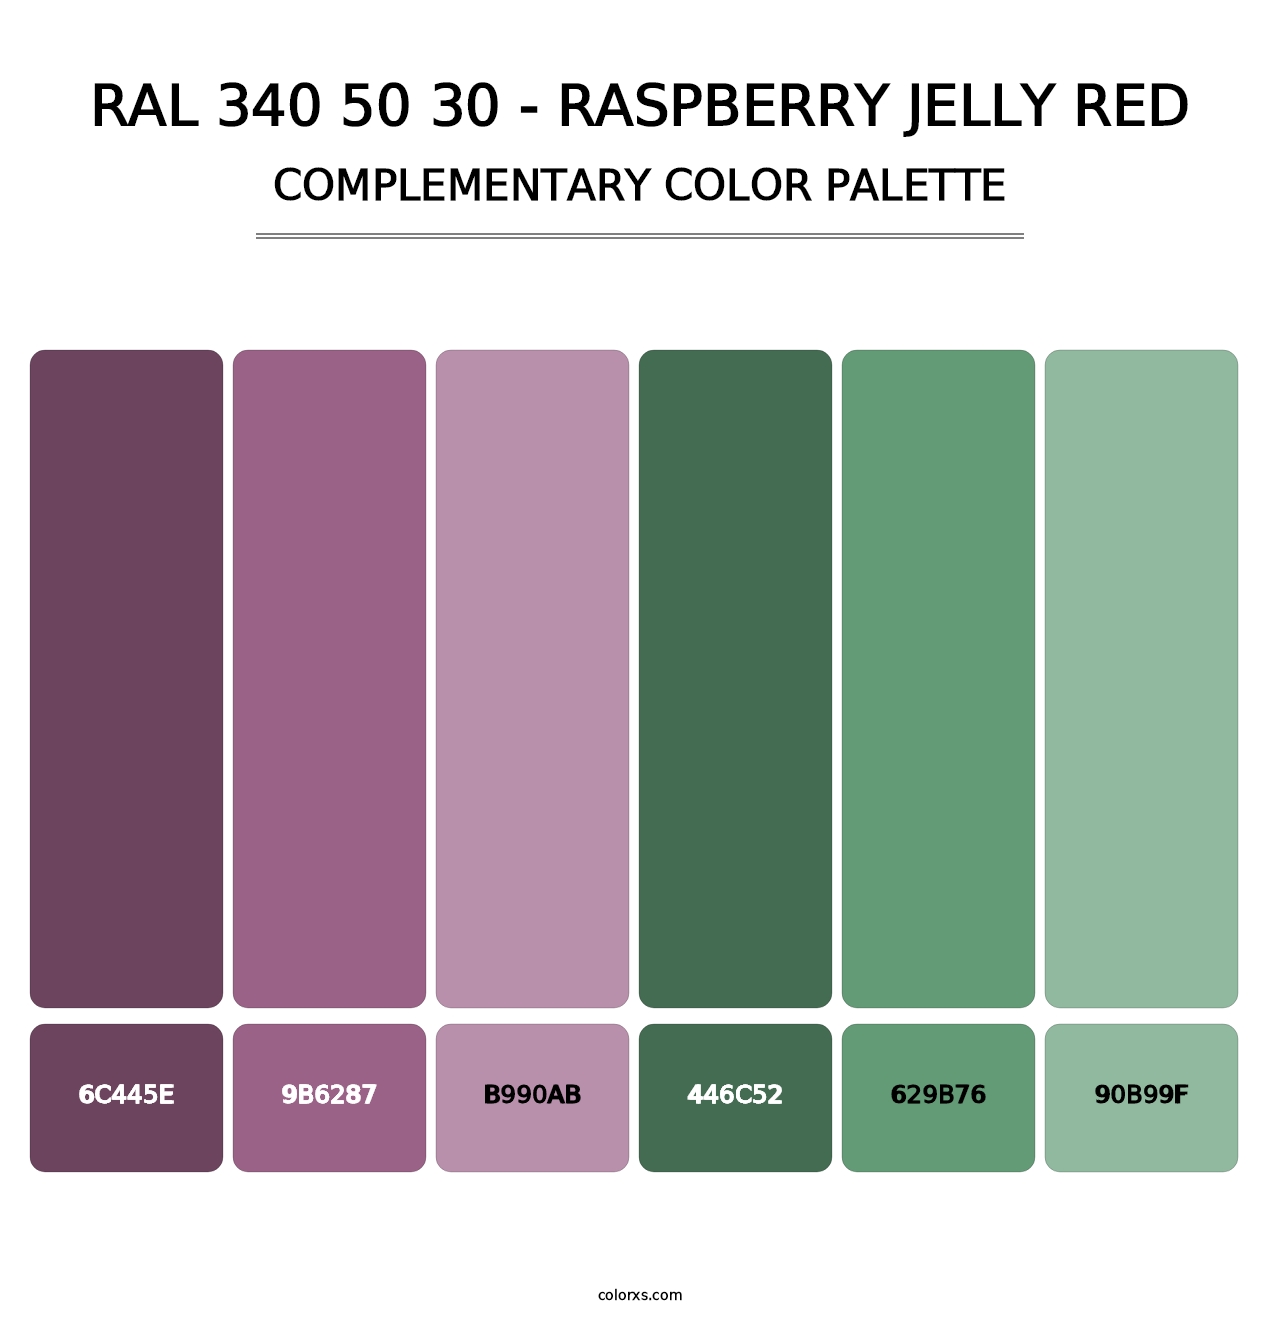 RAL 340 50 30 - Raspberry Jelly Red - Complementary Color Palette